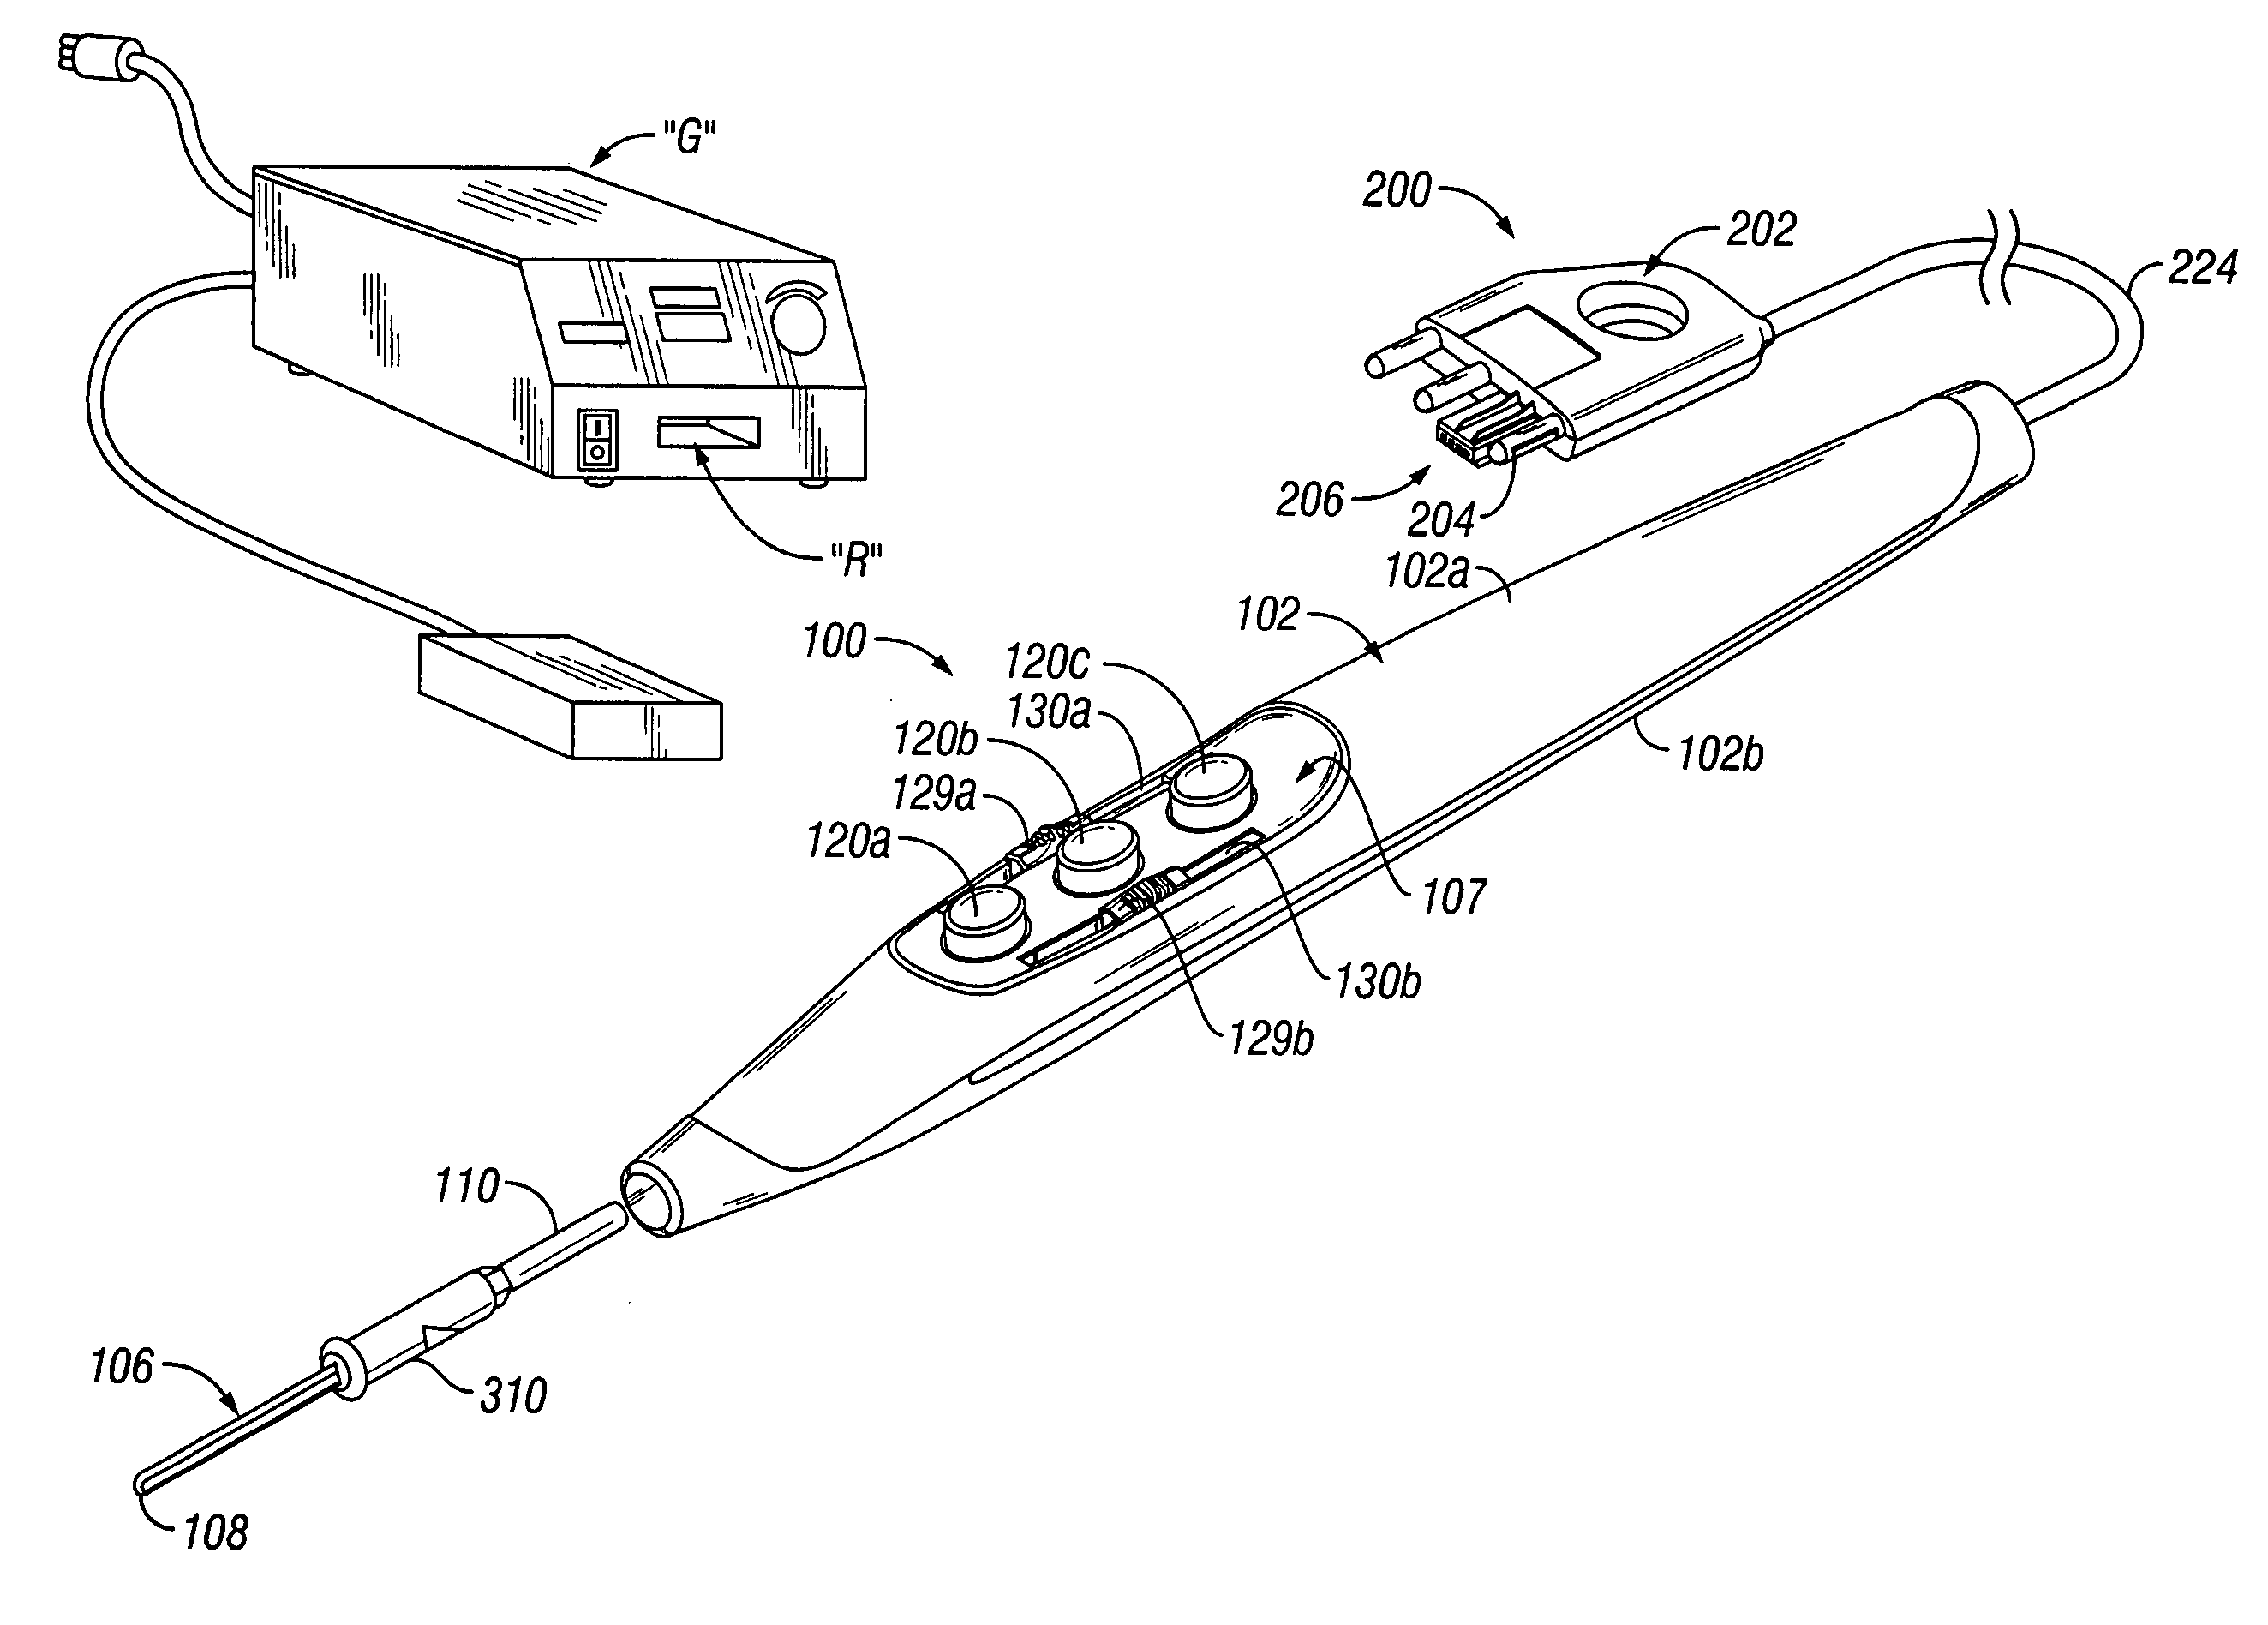 Electrosurgical pencil with advanced es controls